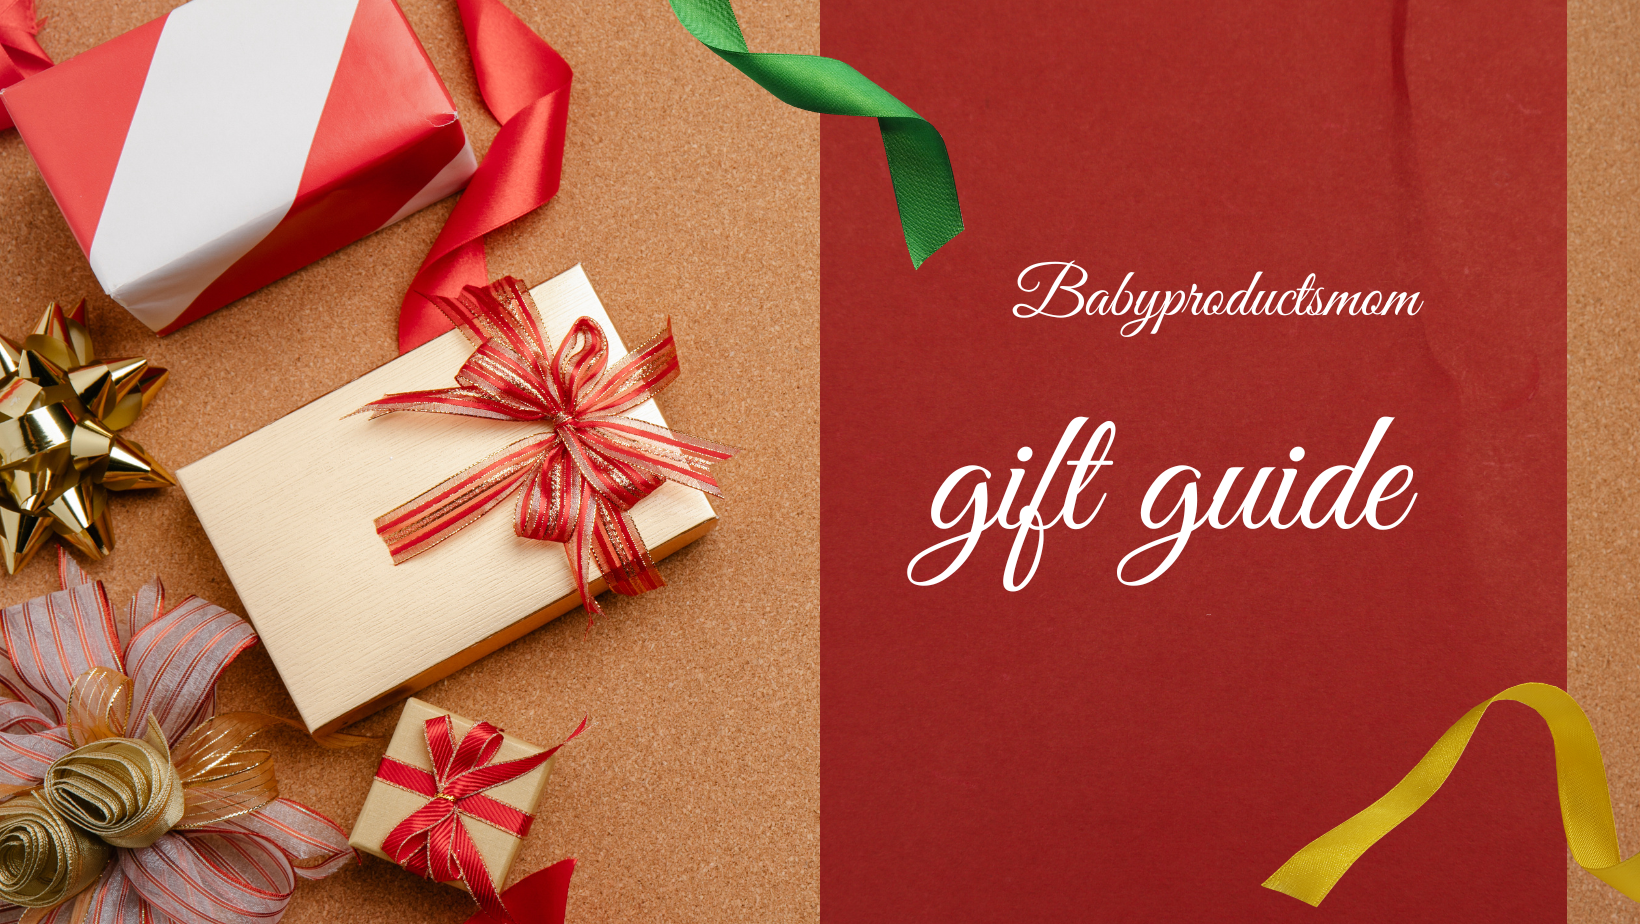 Great gift ideas for grownups